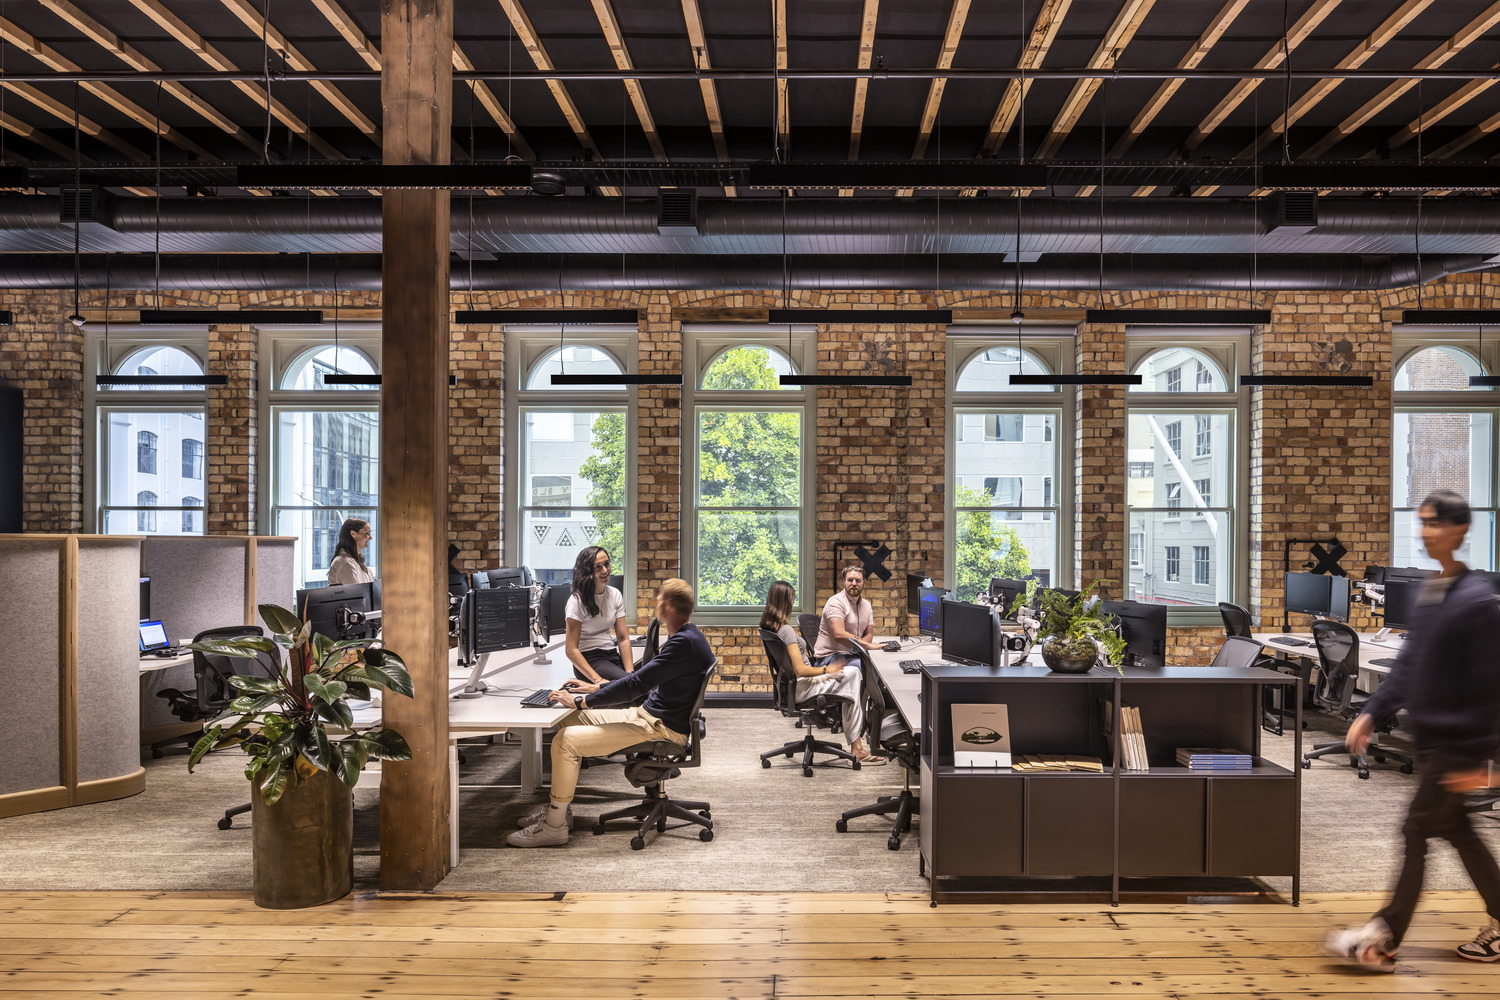 Arup workspace inserted into heritage building